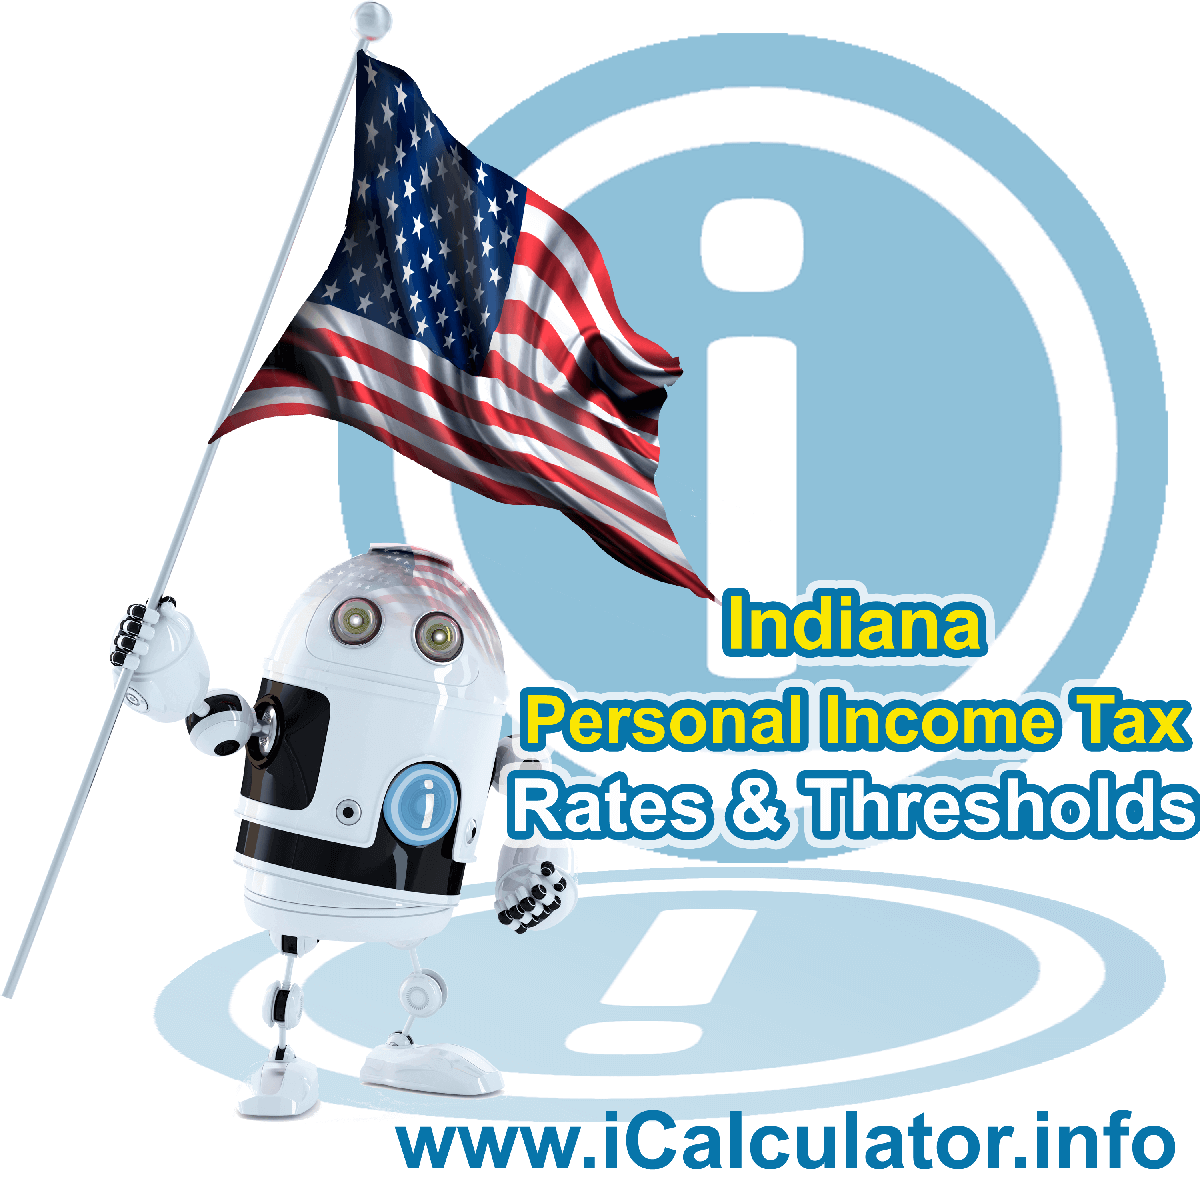 Indiana State Tax Tables 2017. This image displays details of the Indiana State Tax Tables for the 2017 tax return year which is provided in support of the 2017 US Tax Calculator